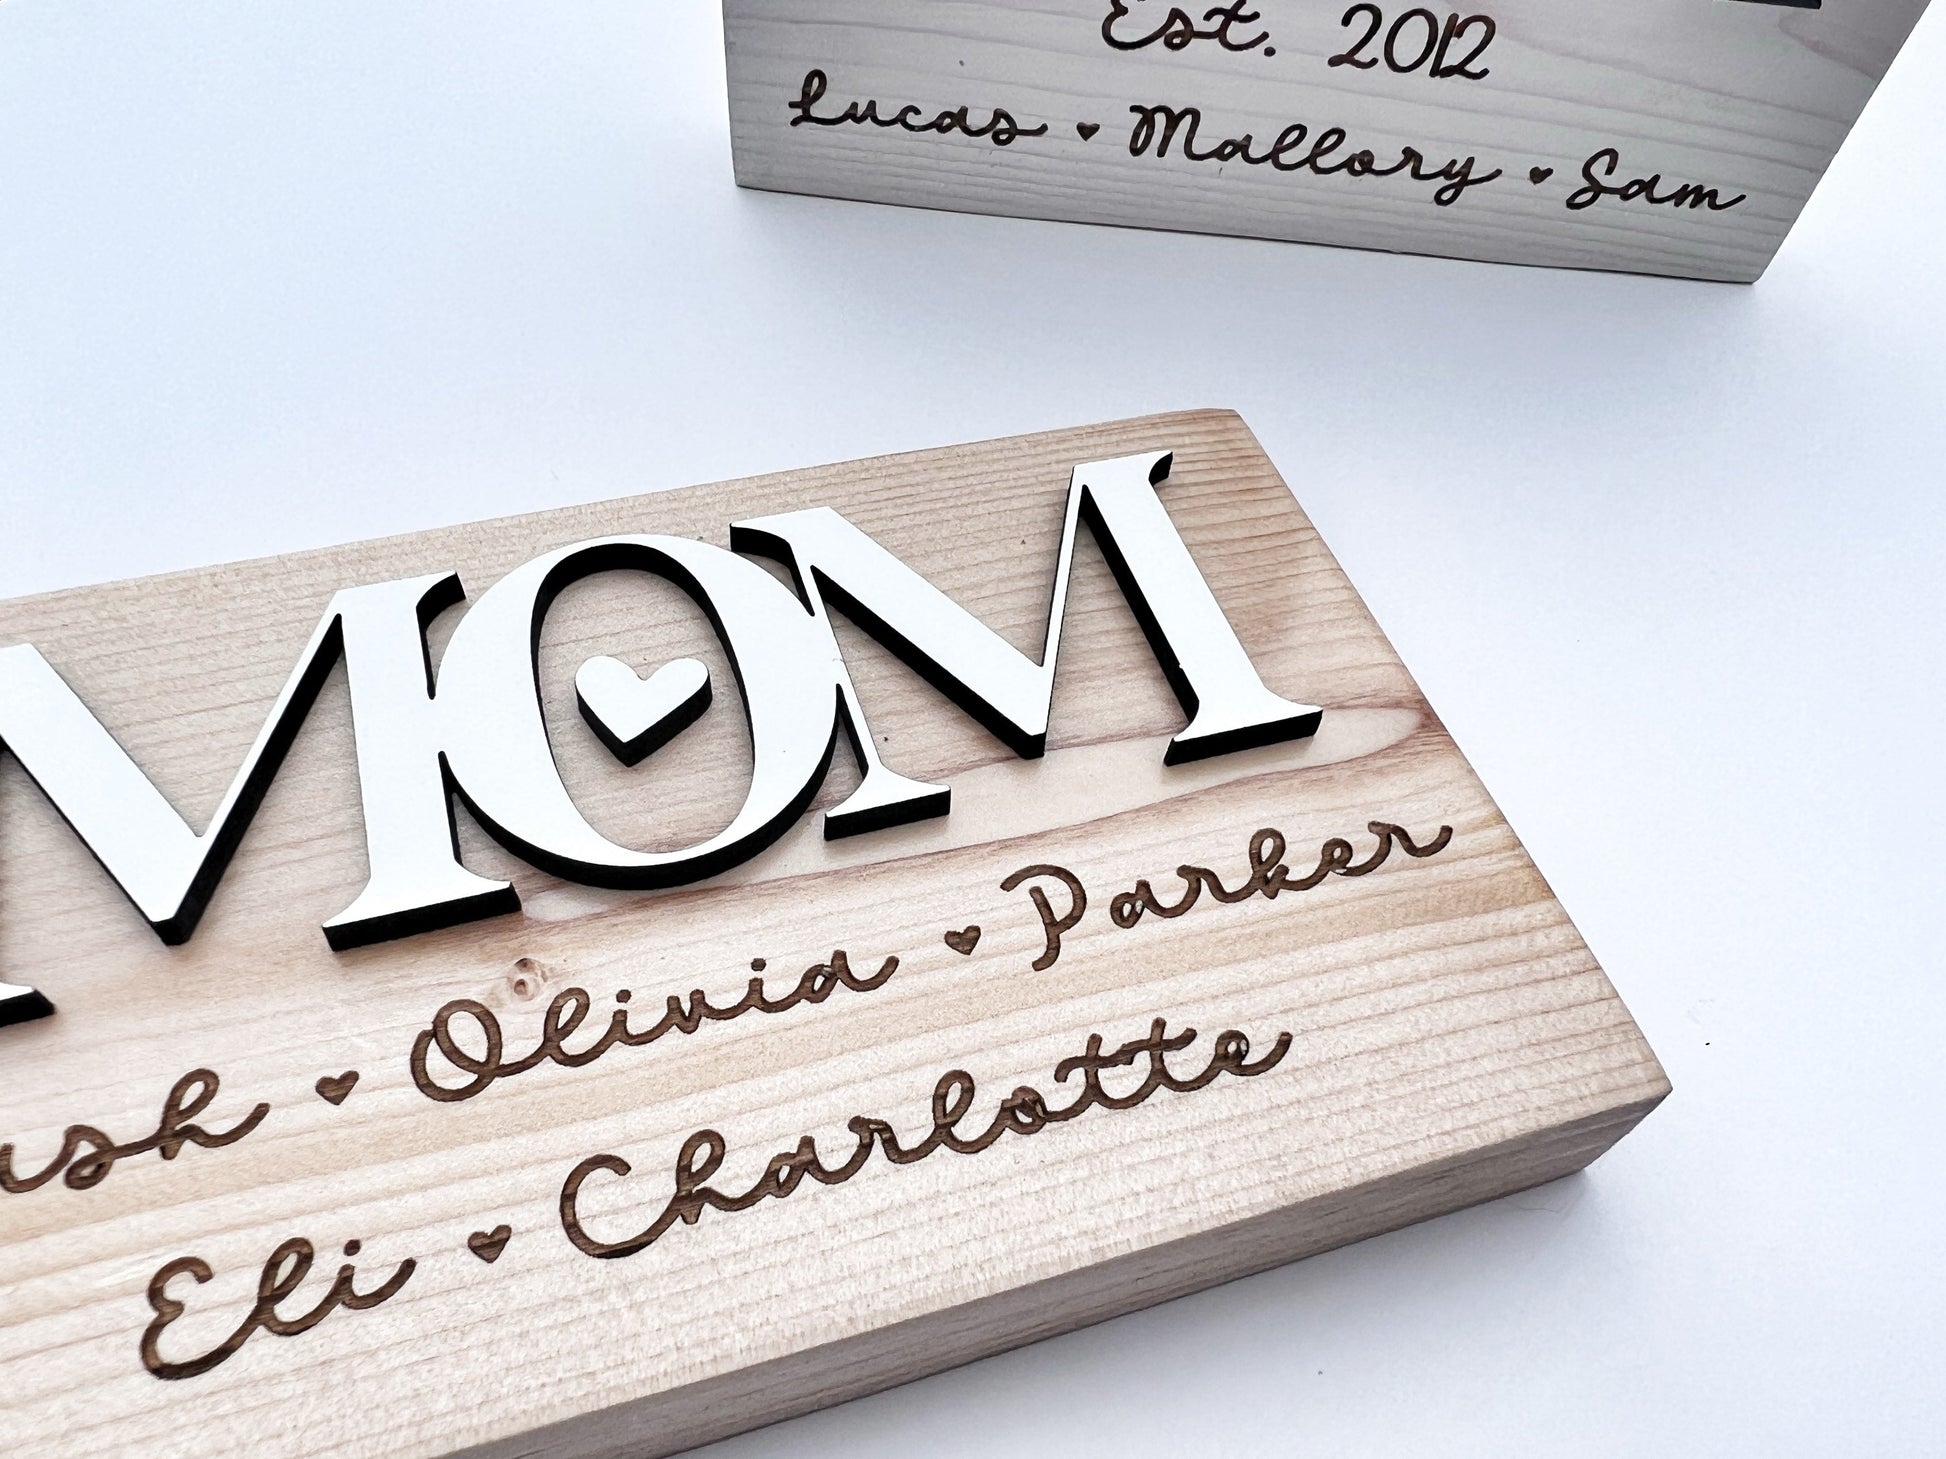 Mom Sign with Names, Personalized Mother's Day Gift from Kids, Small Desk Decor